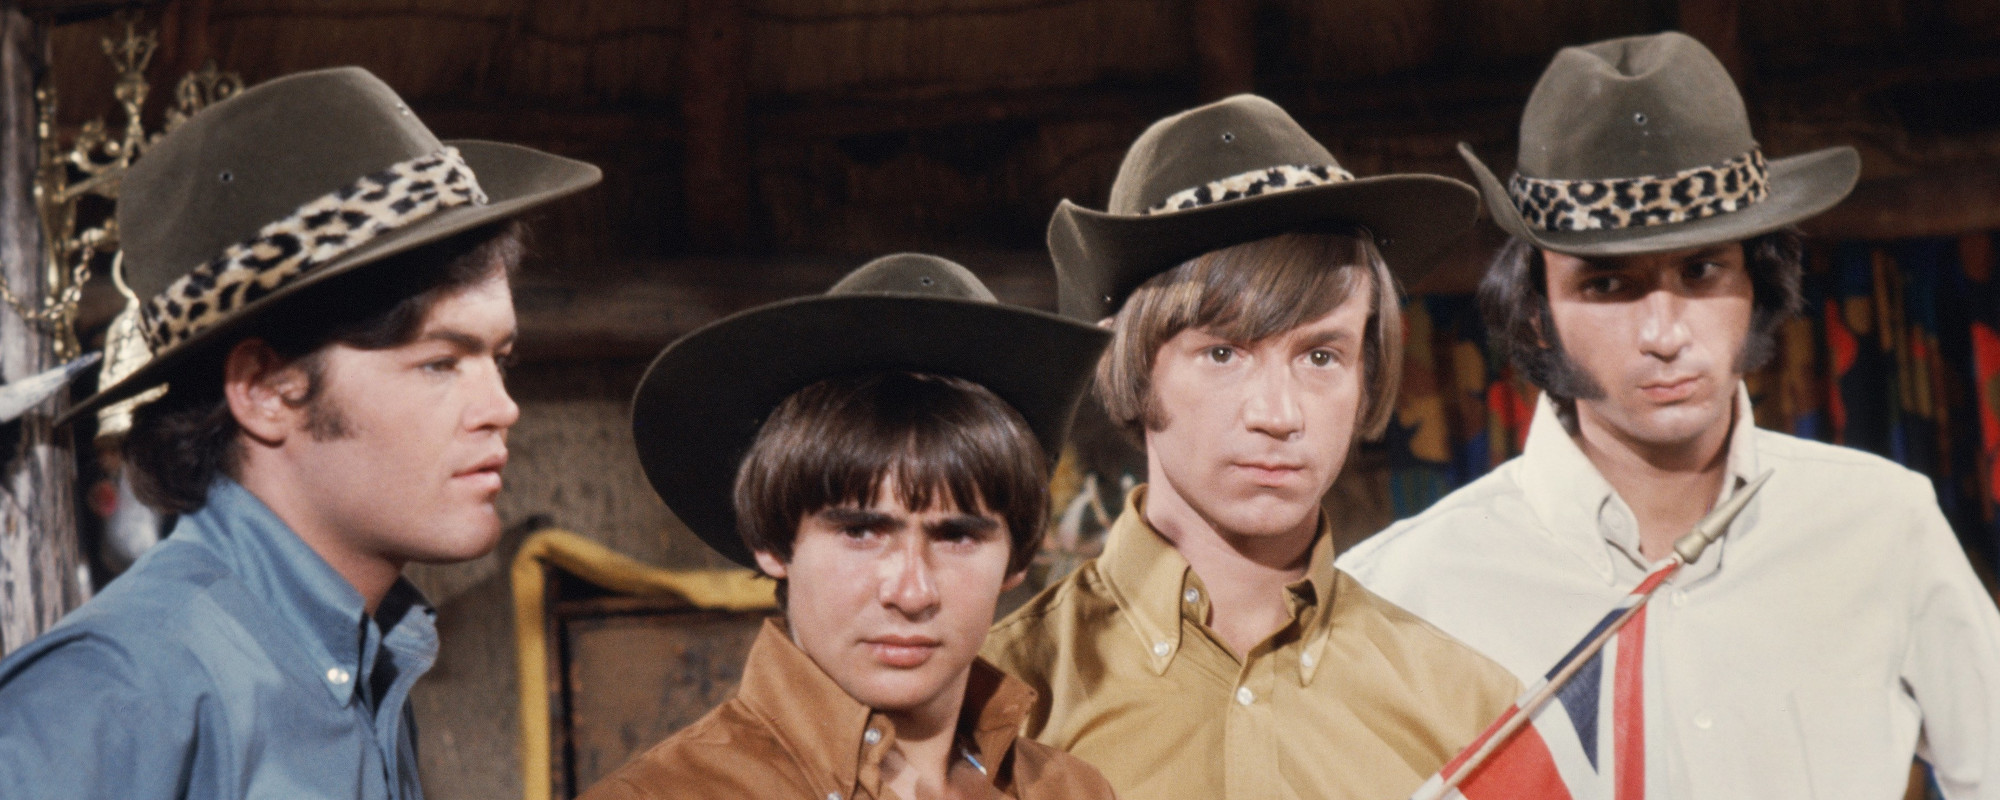 When Don Kirshner Went Too Far: The Story Behind “A Little Bit Me, a Little Bit You” by The Monkees